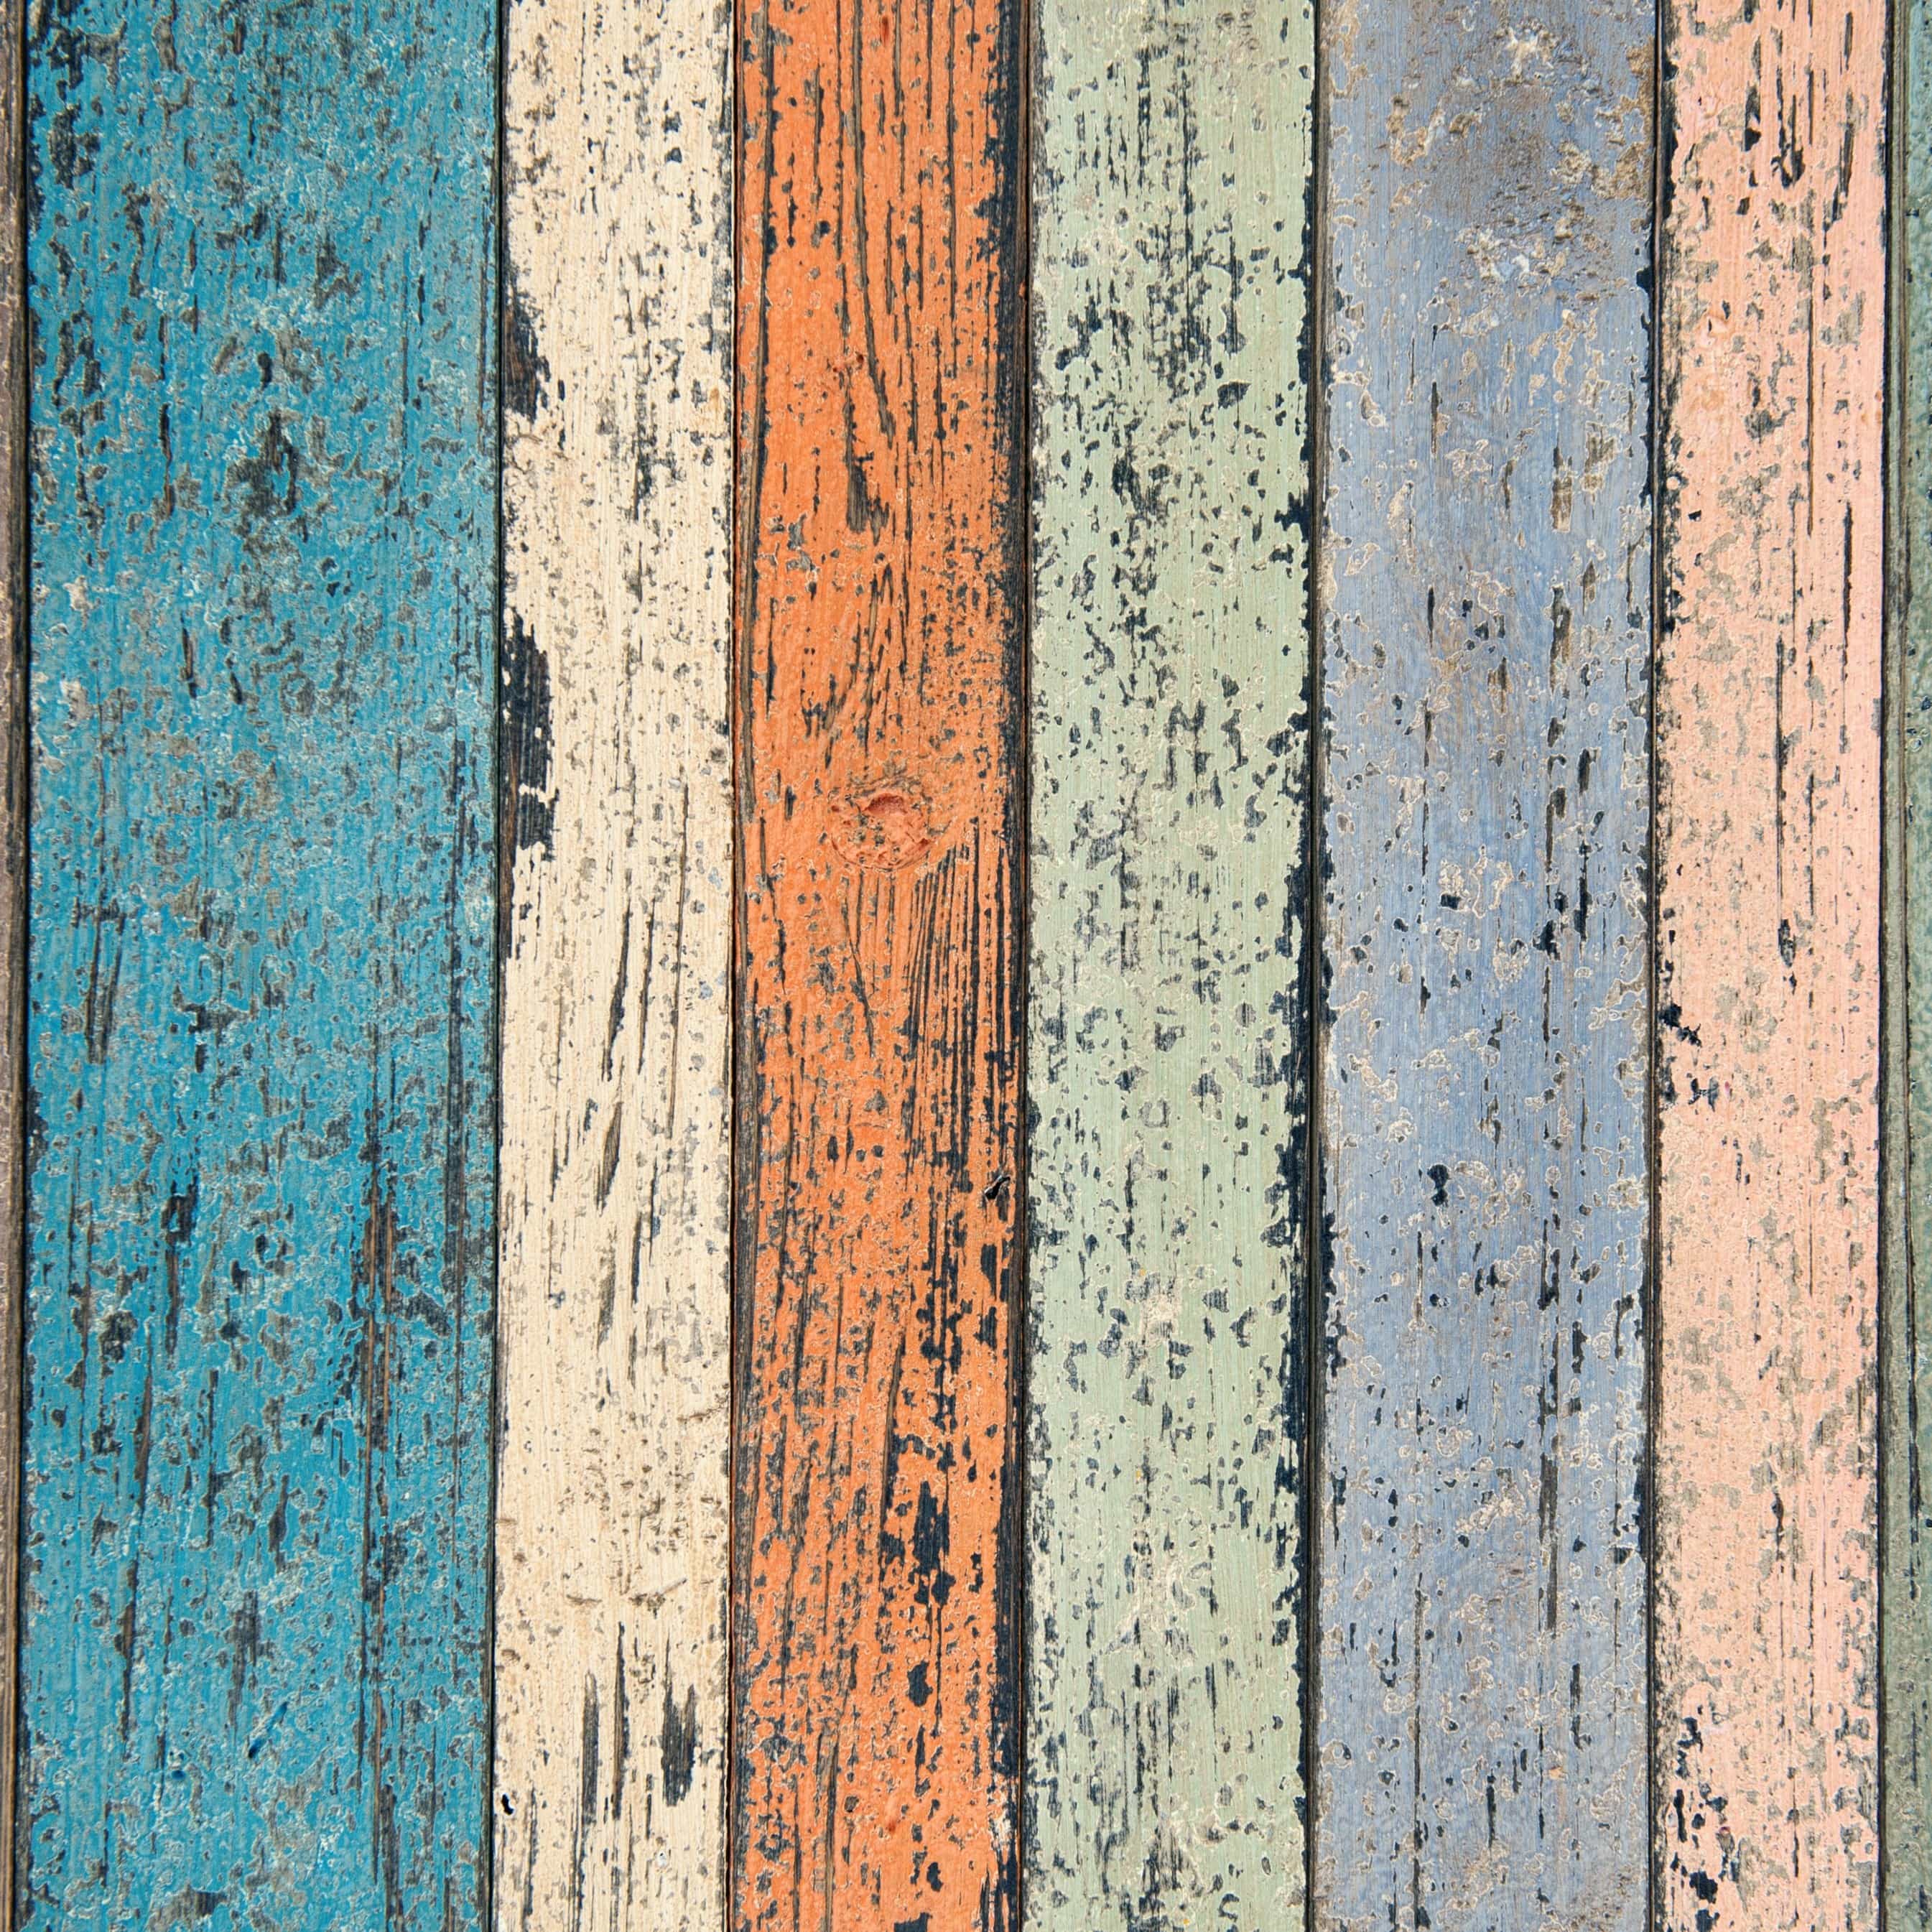 Free picture: old, wood, colorful, surface, hardwood, texture, wood knot